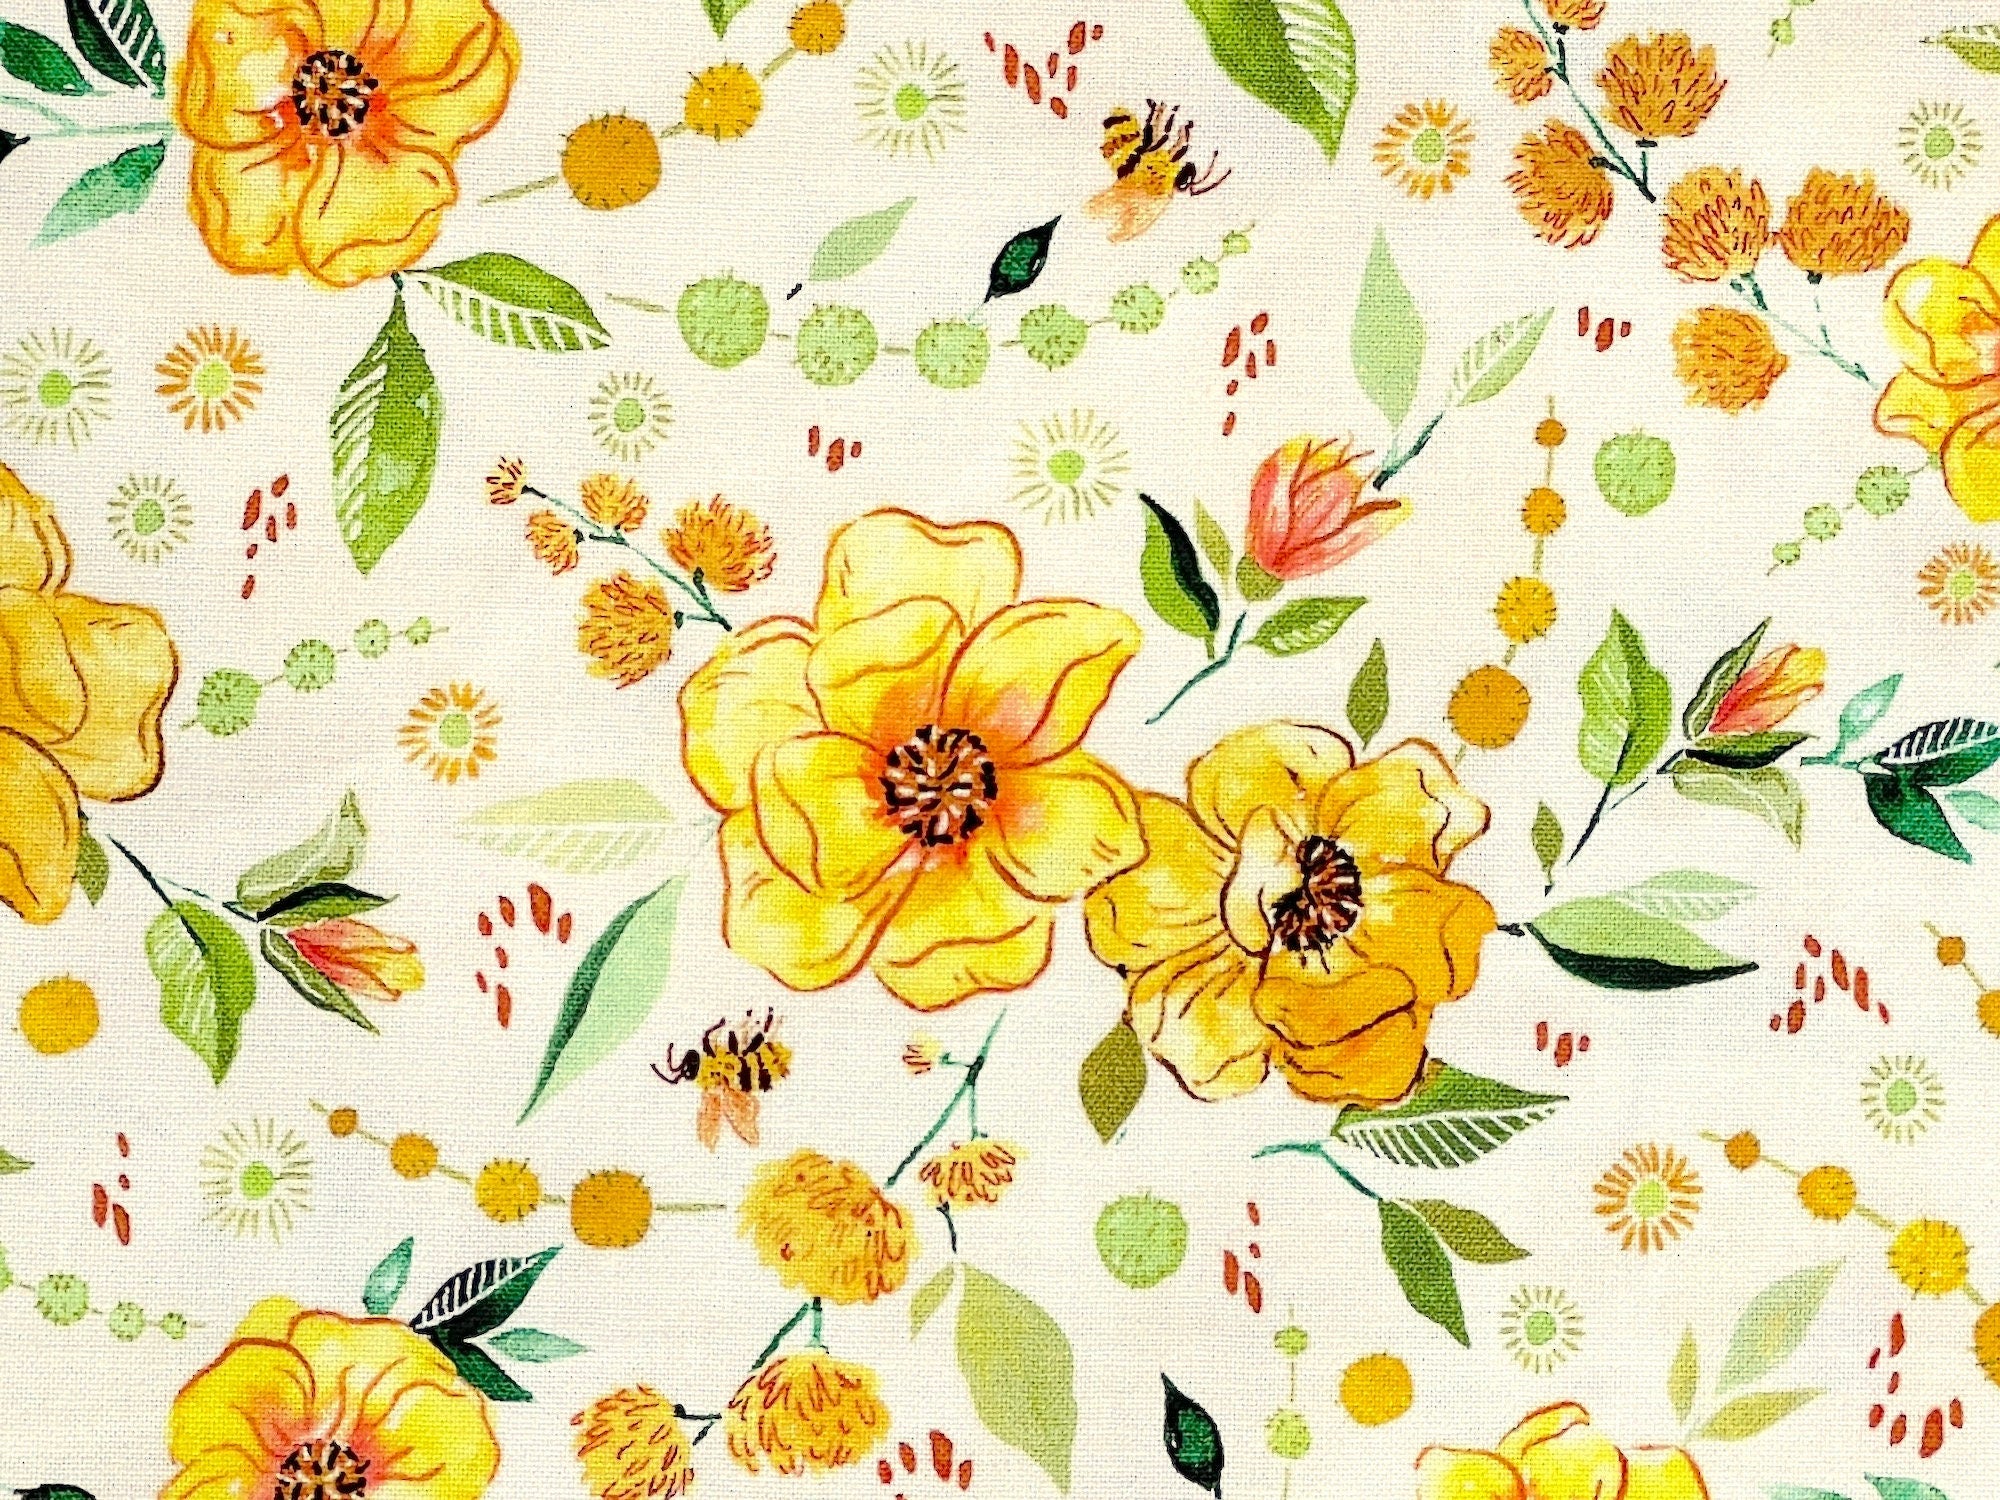 Here is a soft all over Yellow Flower Design. This fabric is perfect for the flower lover. It is a good choice for home decor projects